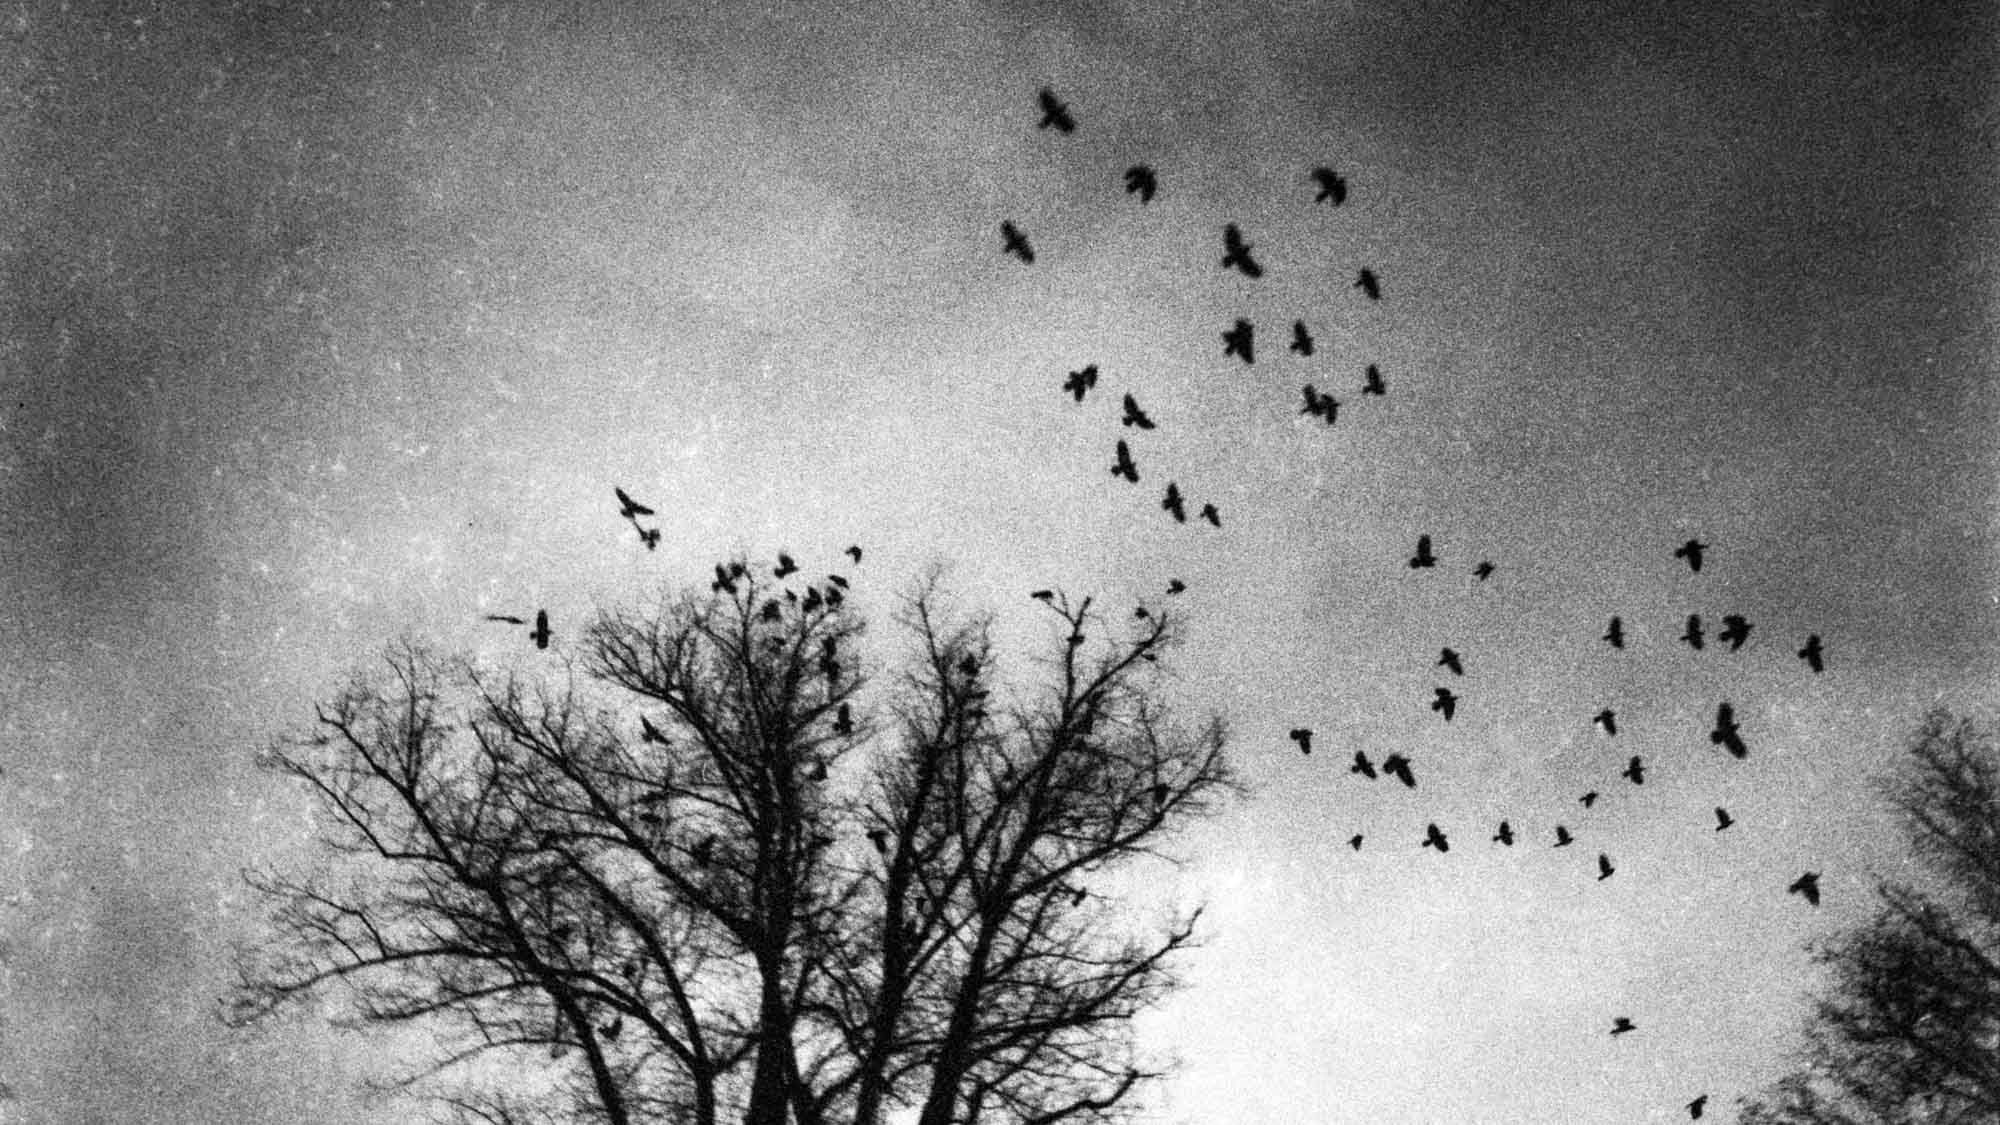 Flying crows in the sky in a black and white mysterious mood